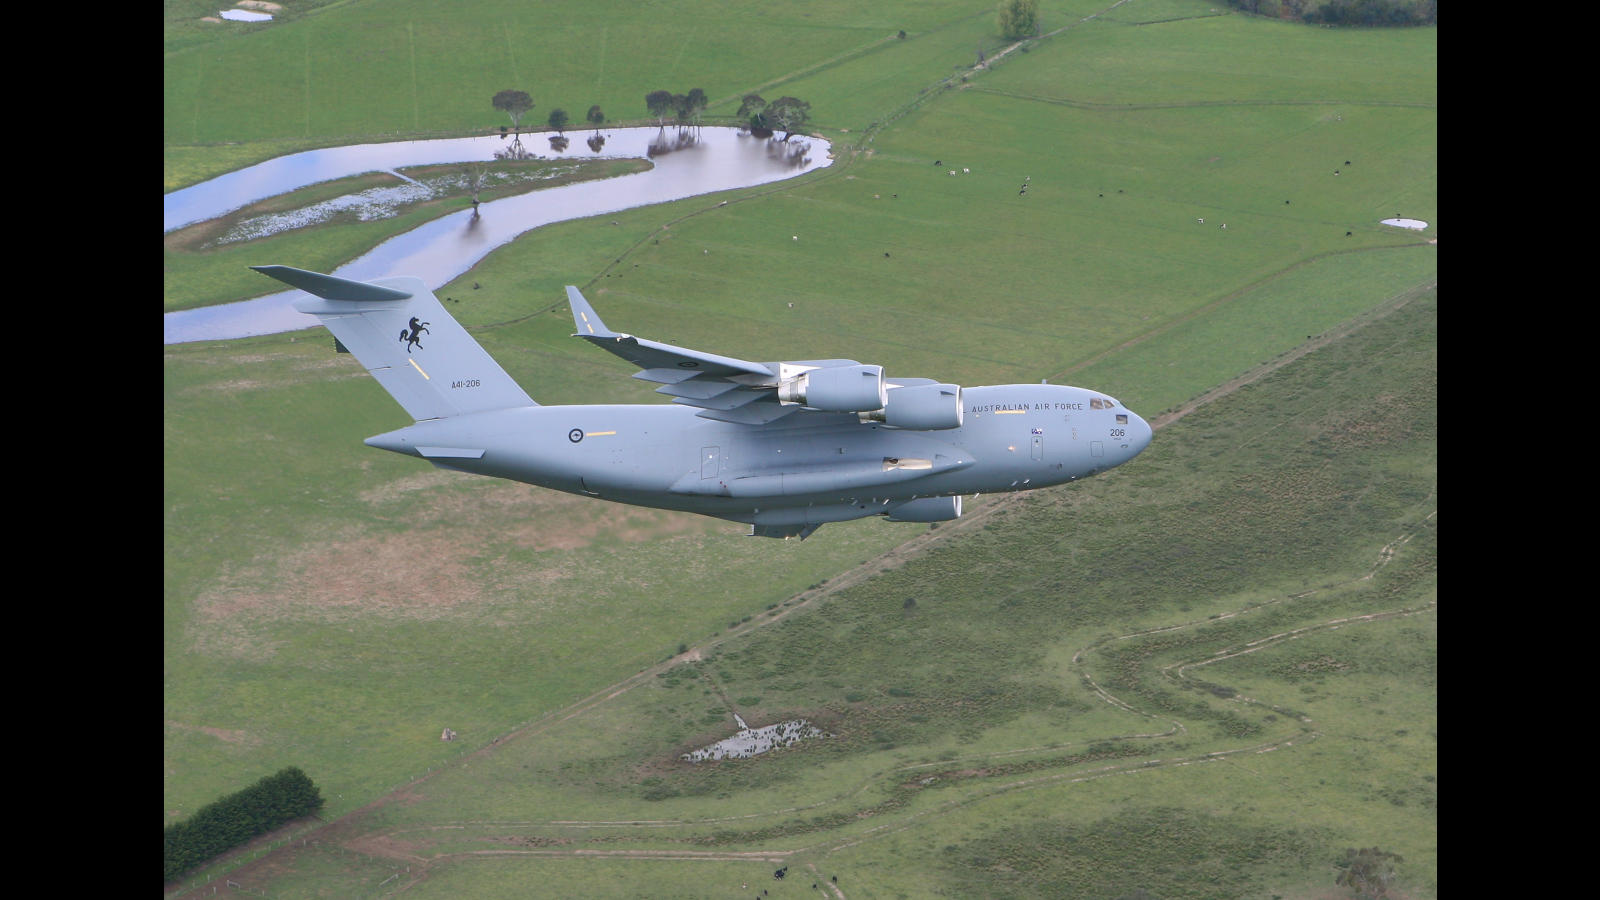 A C-17A Globemaster III aircraft visited Royal Australian Air Force Base (RAAF) East Sale for the first time on Thursday, September 27. The aircraft is operated by No. 36 Squadron (36SQN) based at RAAF Base Amberley in southern Queensland. AFIR No: 000-186-054 *** Local Caption *** The Globemaster is conducting a training flight from its home base and will use the opportunity to show the aircraft to local personnel at RAAF Base East Sale. The training sortie to Victoria will provide experience to crew members new to the Globemaster, which brings a quantum leap in air lift capability to the RAAF. The Commanding Officer of 36SQN, Wing Commander Linda Corbould, said "The Globemaster can carry almost four times the cargo of our other combat airlift workhorse, the C-130 Hercules, and fly that load faster and further. It can transport two Army Black Hawk helicopters plus their supporting equipment, or an air-transportable field hospital in a disaster relief role". The RAAF’s first two Globemaster aircraft were delivered in December 2006 and May 2007 respectively, with the final two aircraft due for delivery by mid-2008. Earlier this month, the Air Force announced the Globemaster had reached Initial Operating Capability, clearing it to support ongoing Australian Defence Force operations around the world. Final Operating Capability is expected in 2011, when permanent facilities for 36SQN will be completed at RAAF Base Amberley. The role of the C-17 will continue to expand within the RAAF to include more complex tactical roles, including airdrop of personnel and equipment, and also the aeromedical evacuation of high dependency patients.